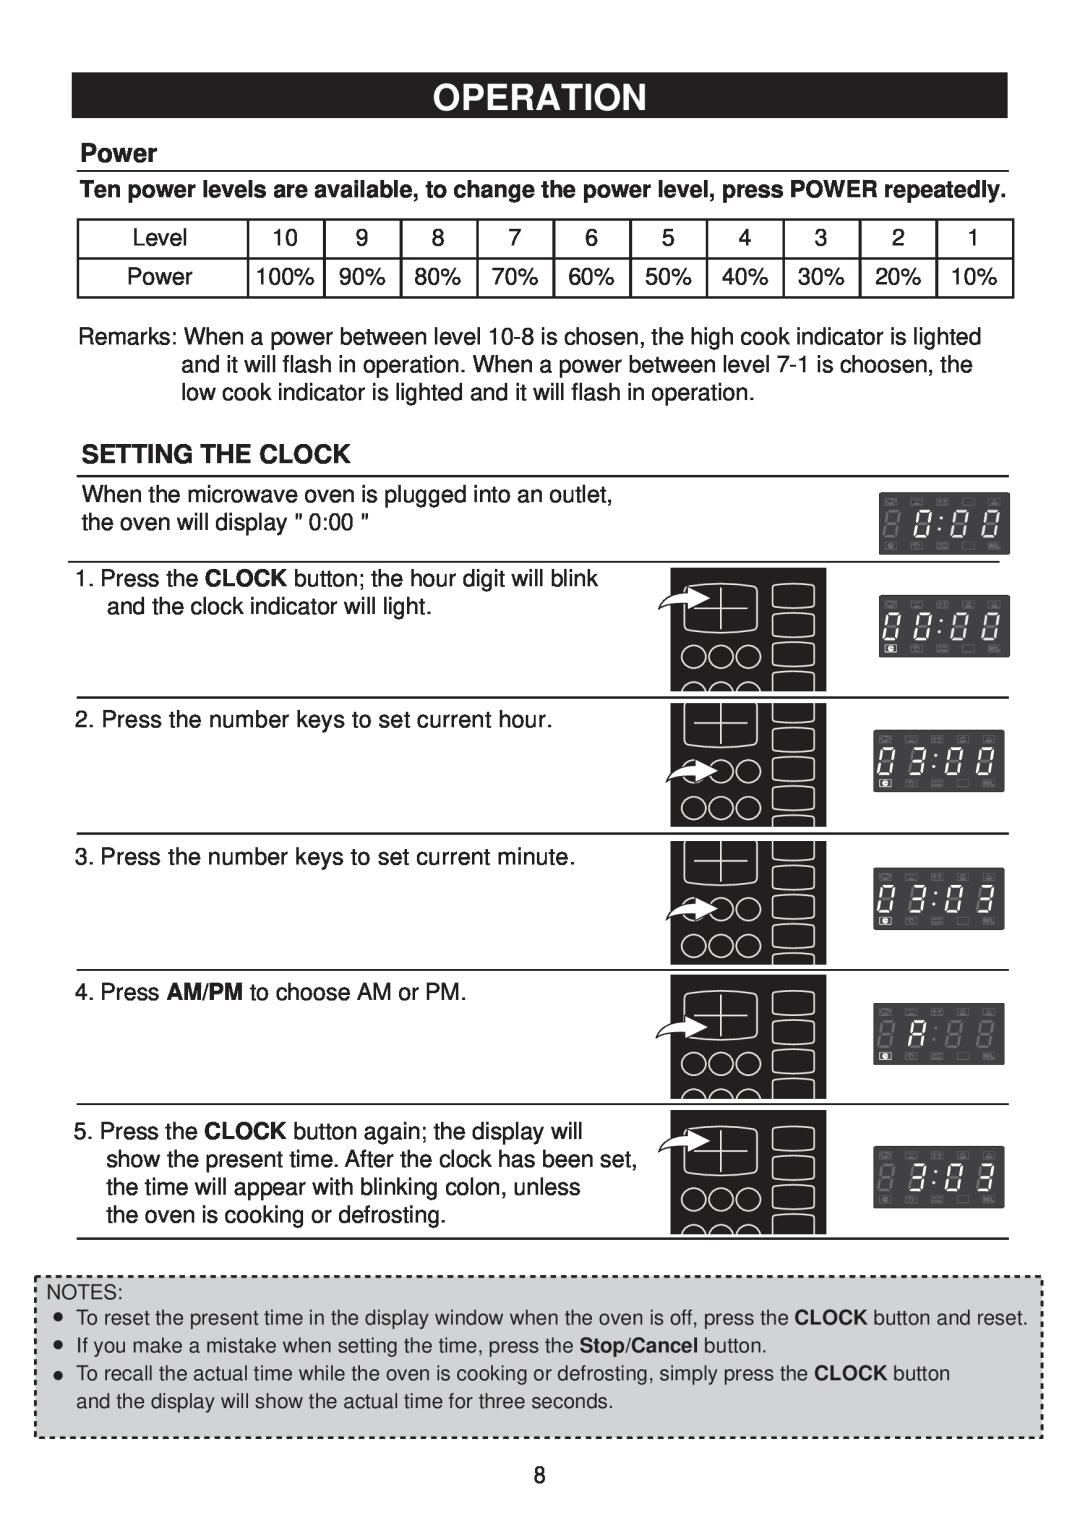 Emerson MW8991SB owner manual Operation, Power, Setting The Clock 